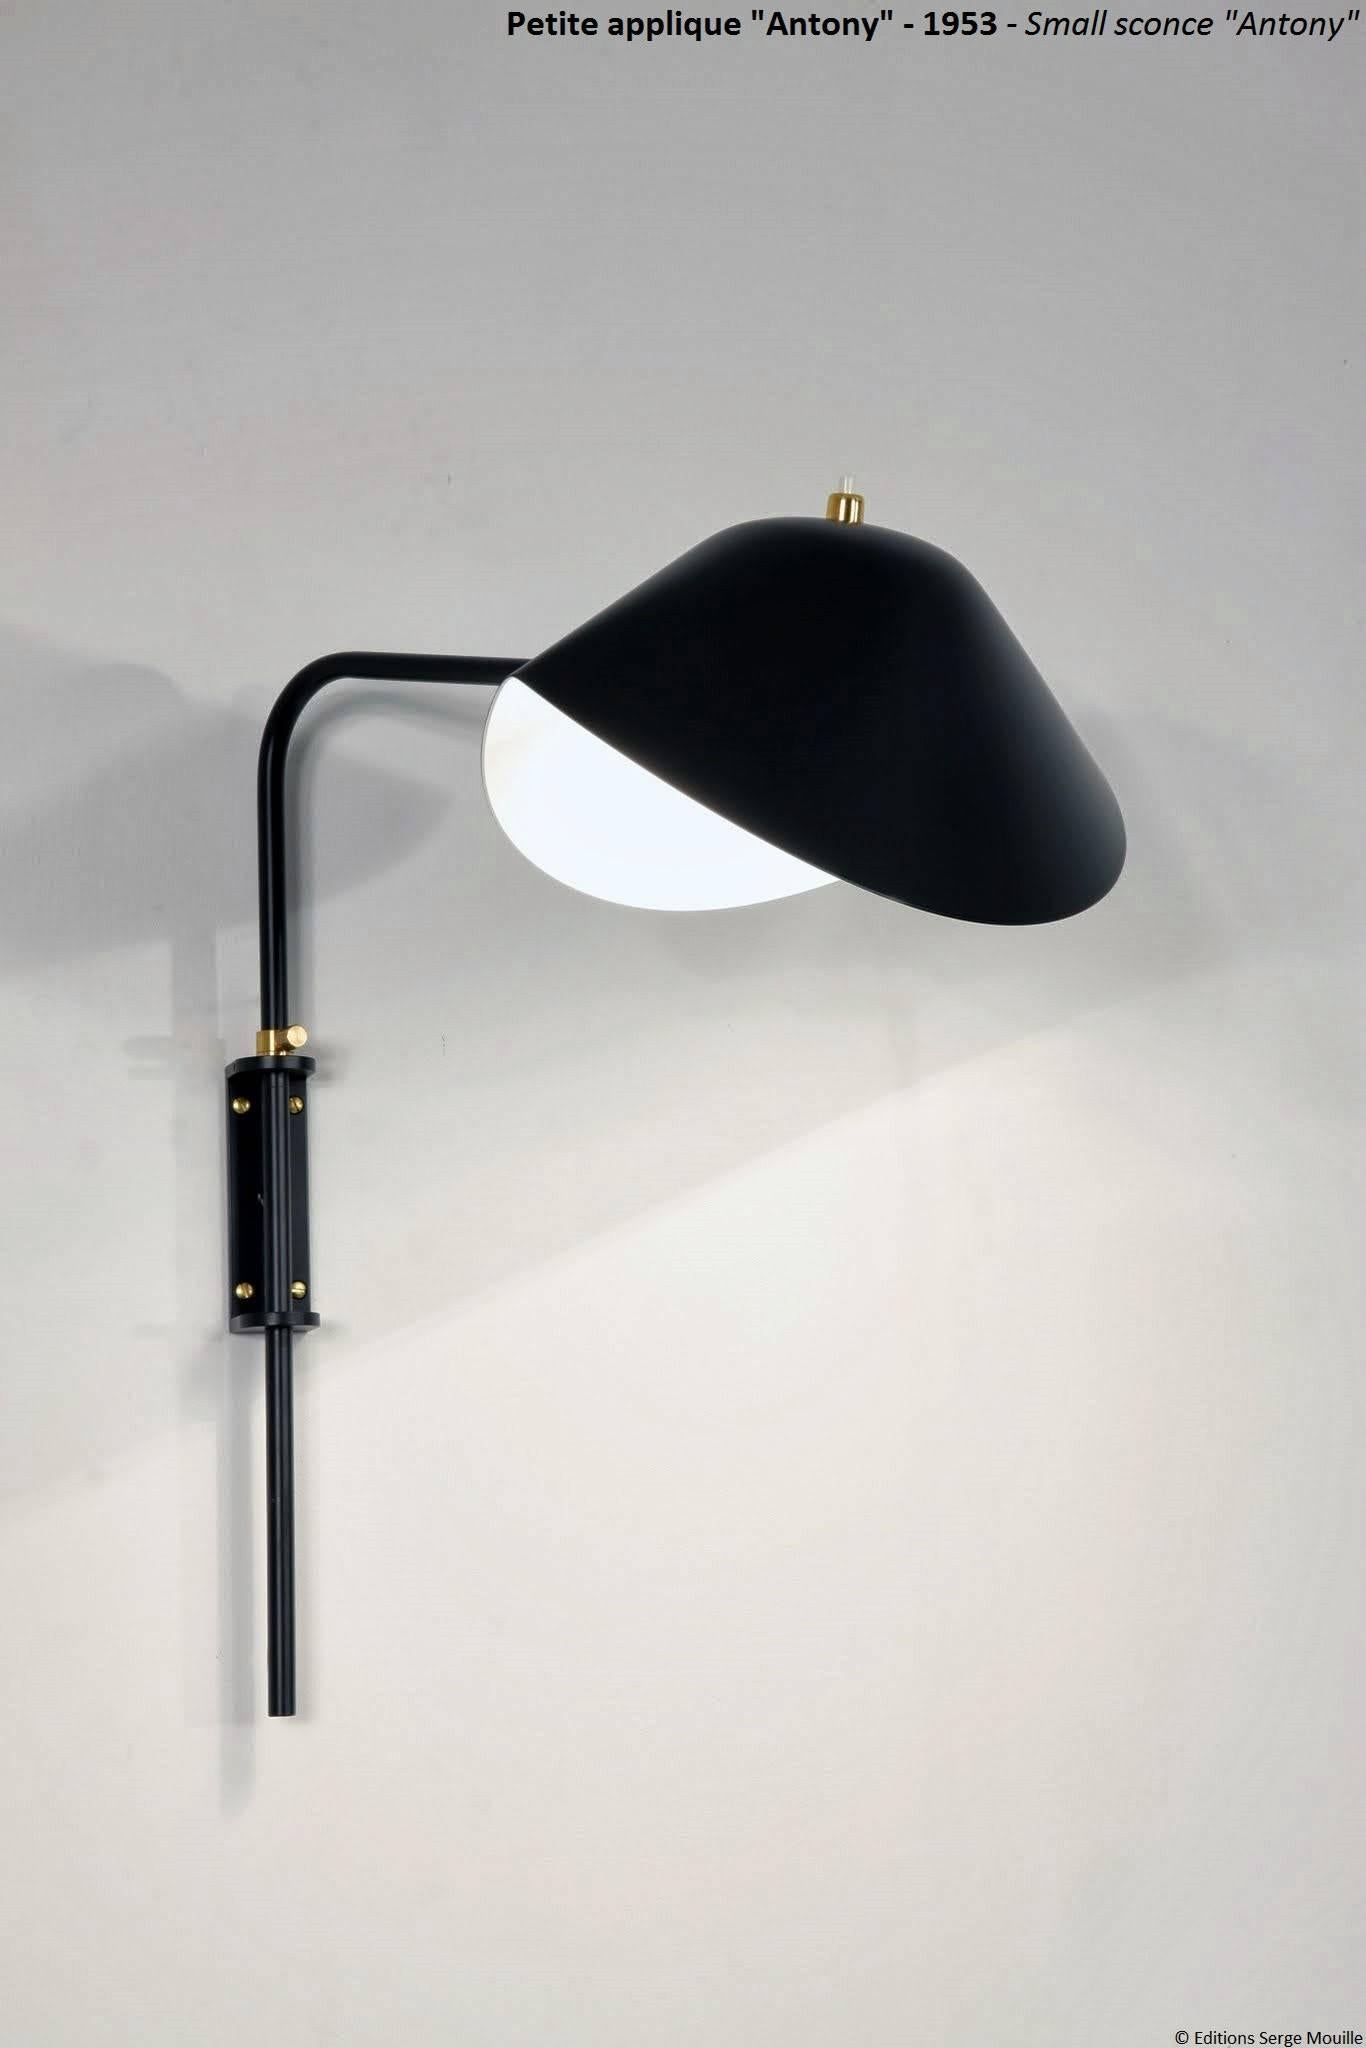 This lamp appeared with its tube bent almost square and pivoting in a fixing lug in the wall. The horizontal arm supported the reflector fitted to a ball and joint socket. There were countless variants of this model, based on the length and the